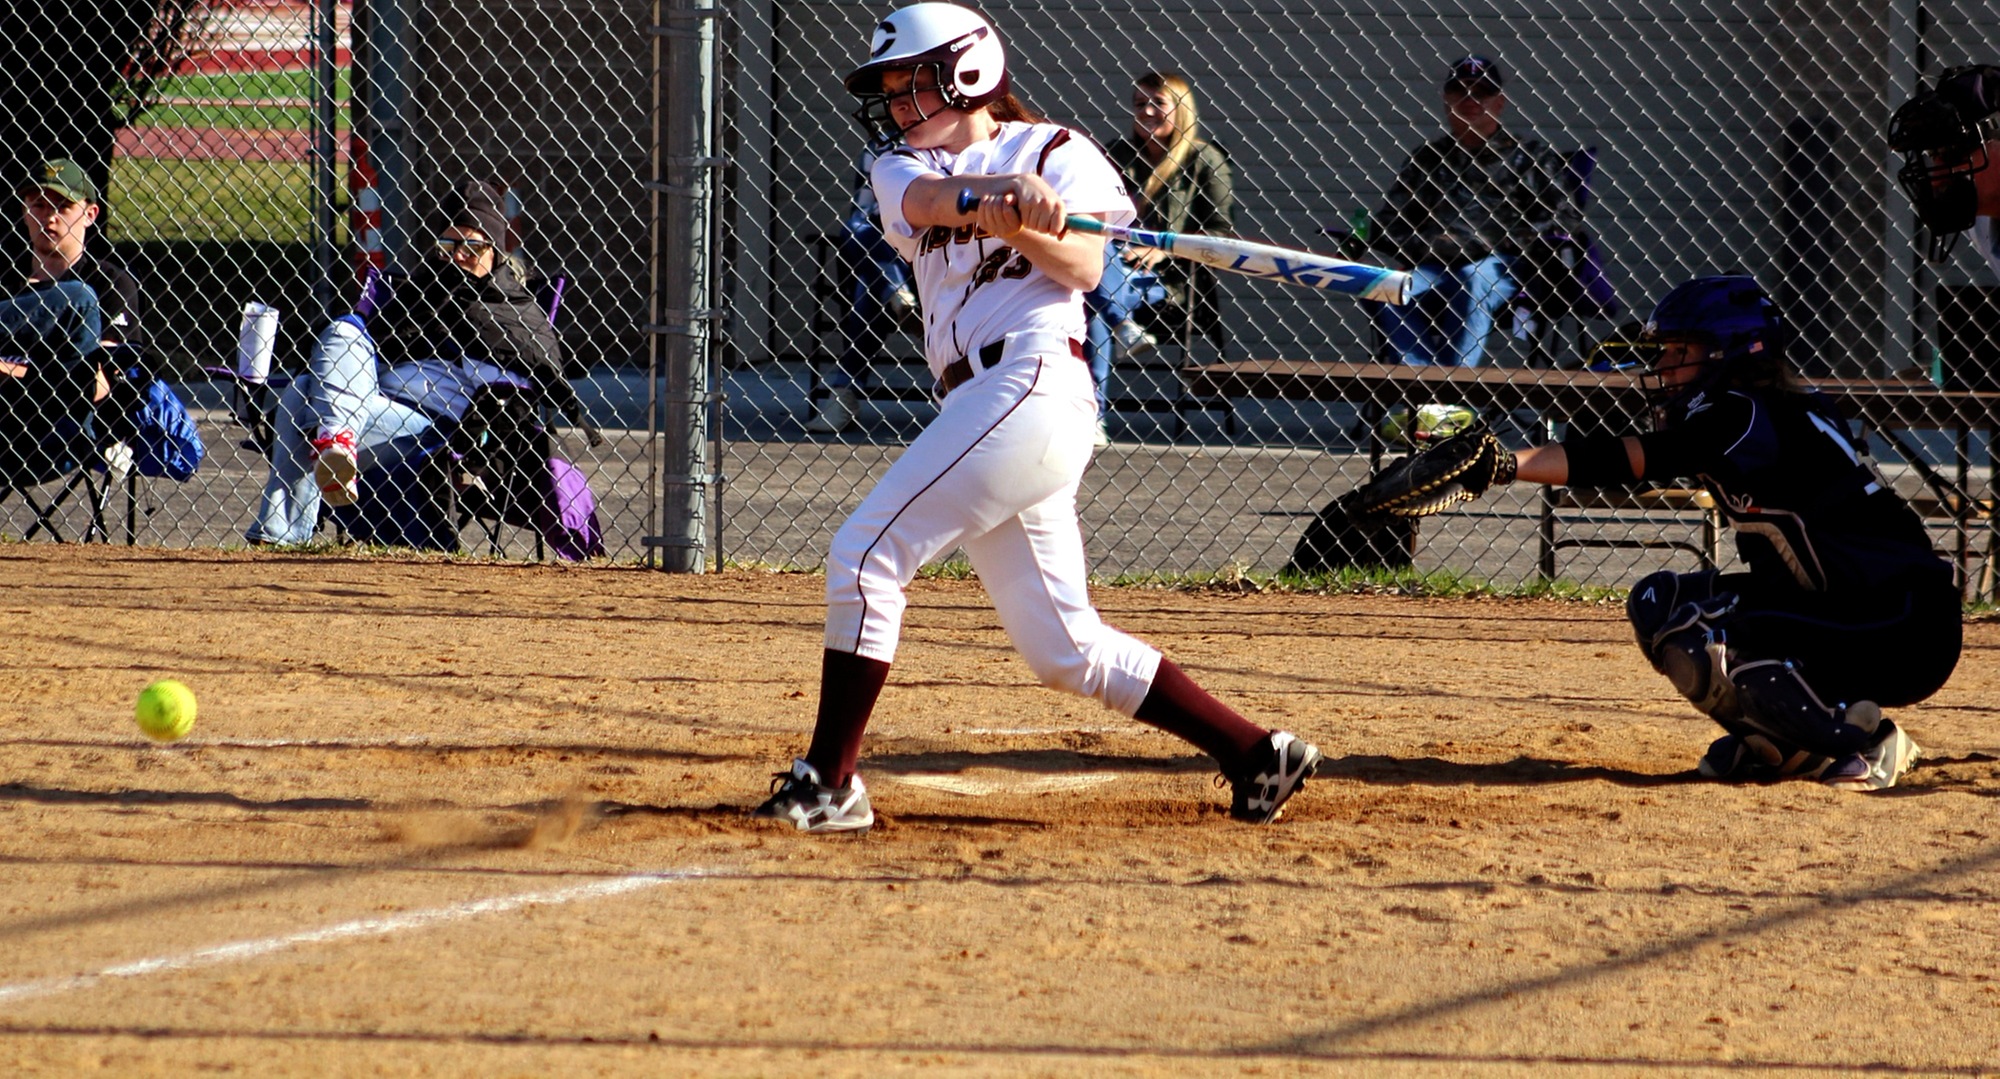 Gabby Gardner puts the ball in play in the first game of the Cobbers' DH with St. Thomas. She went 1-for-2 with an RBI in the game.